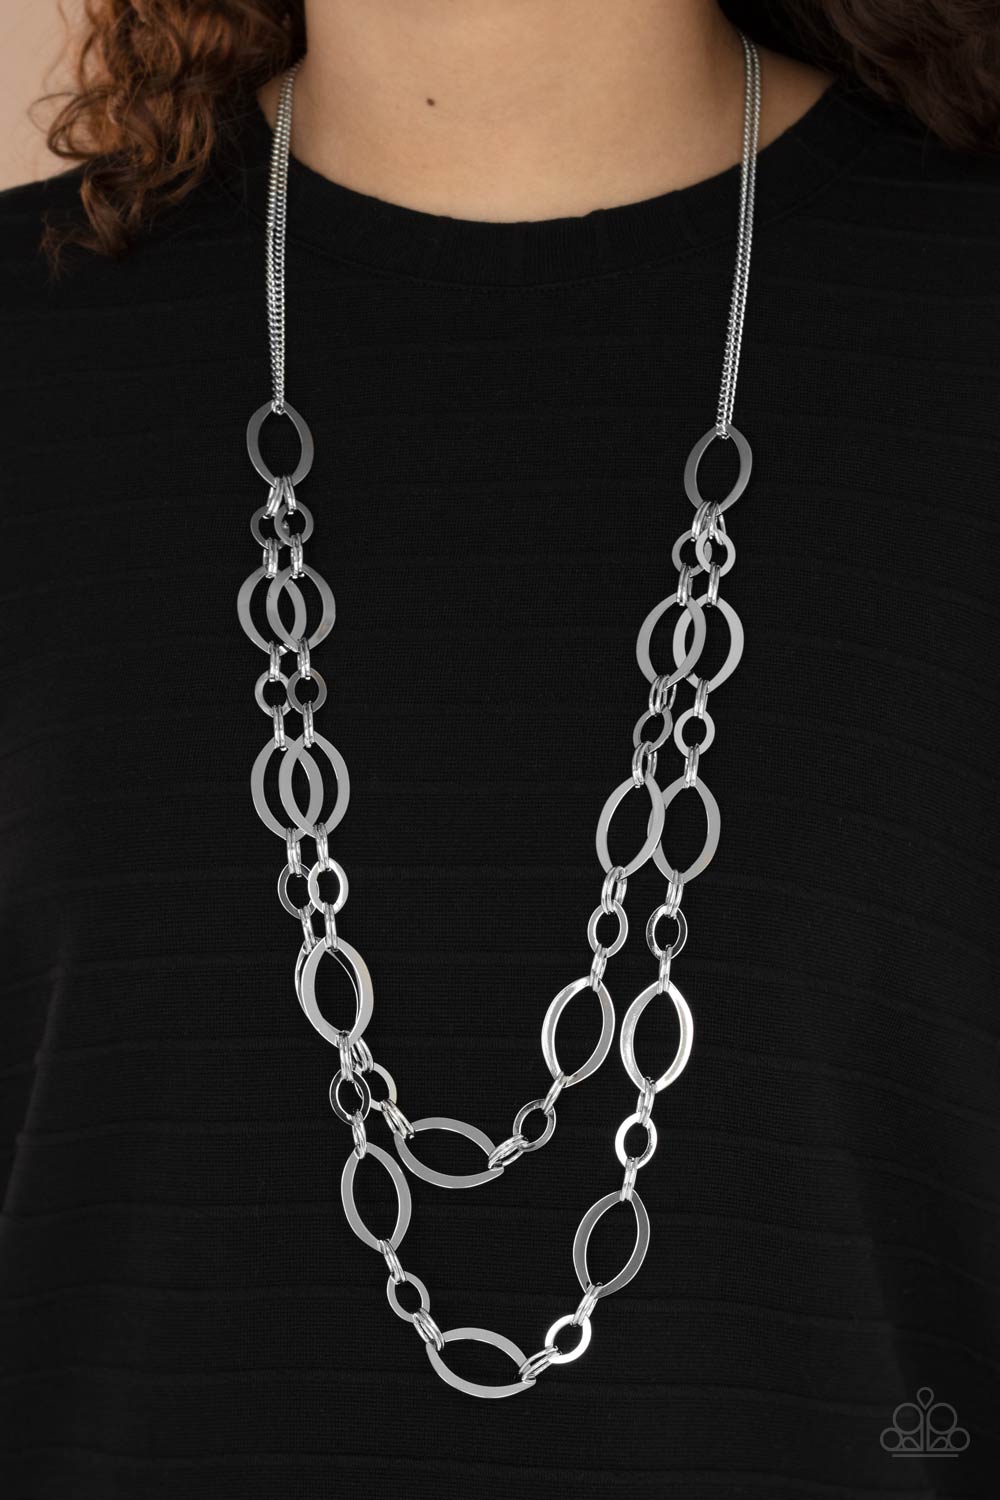 The OVAL-achiever Necklace - Silver